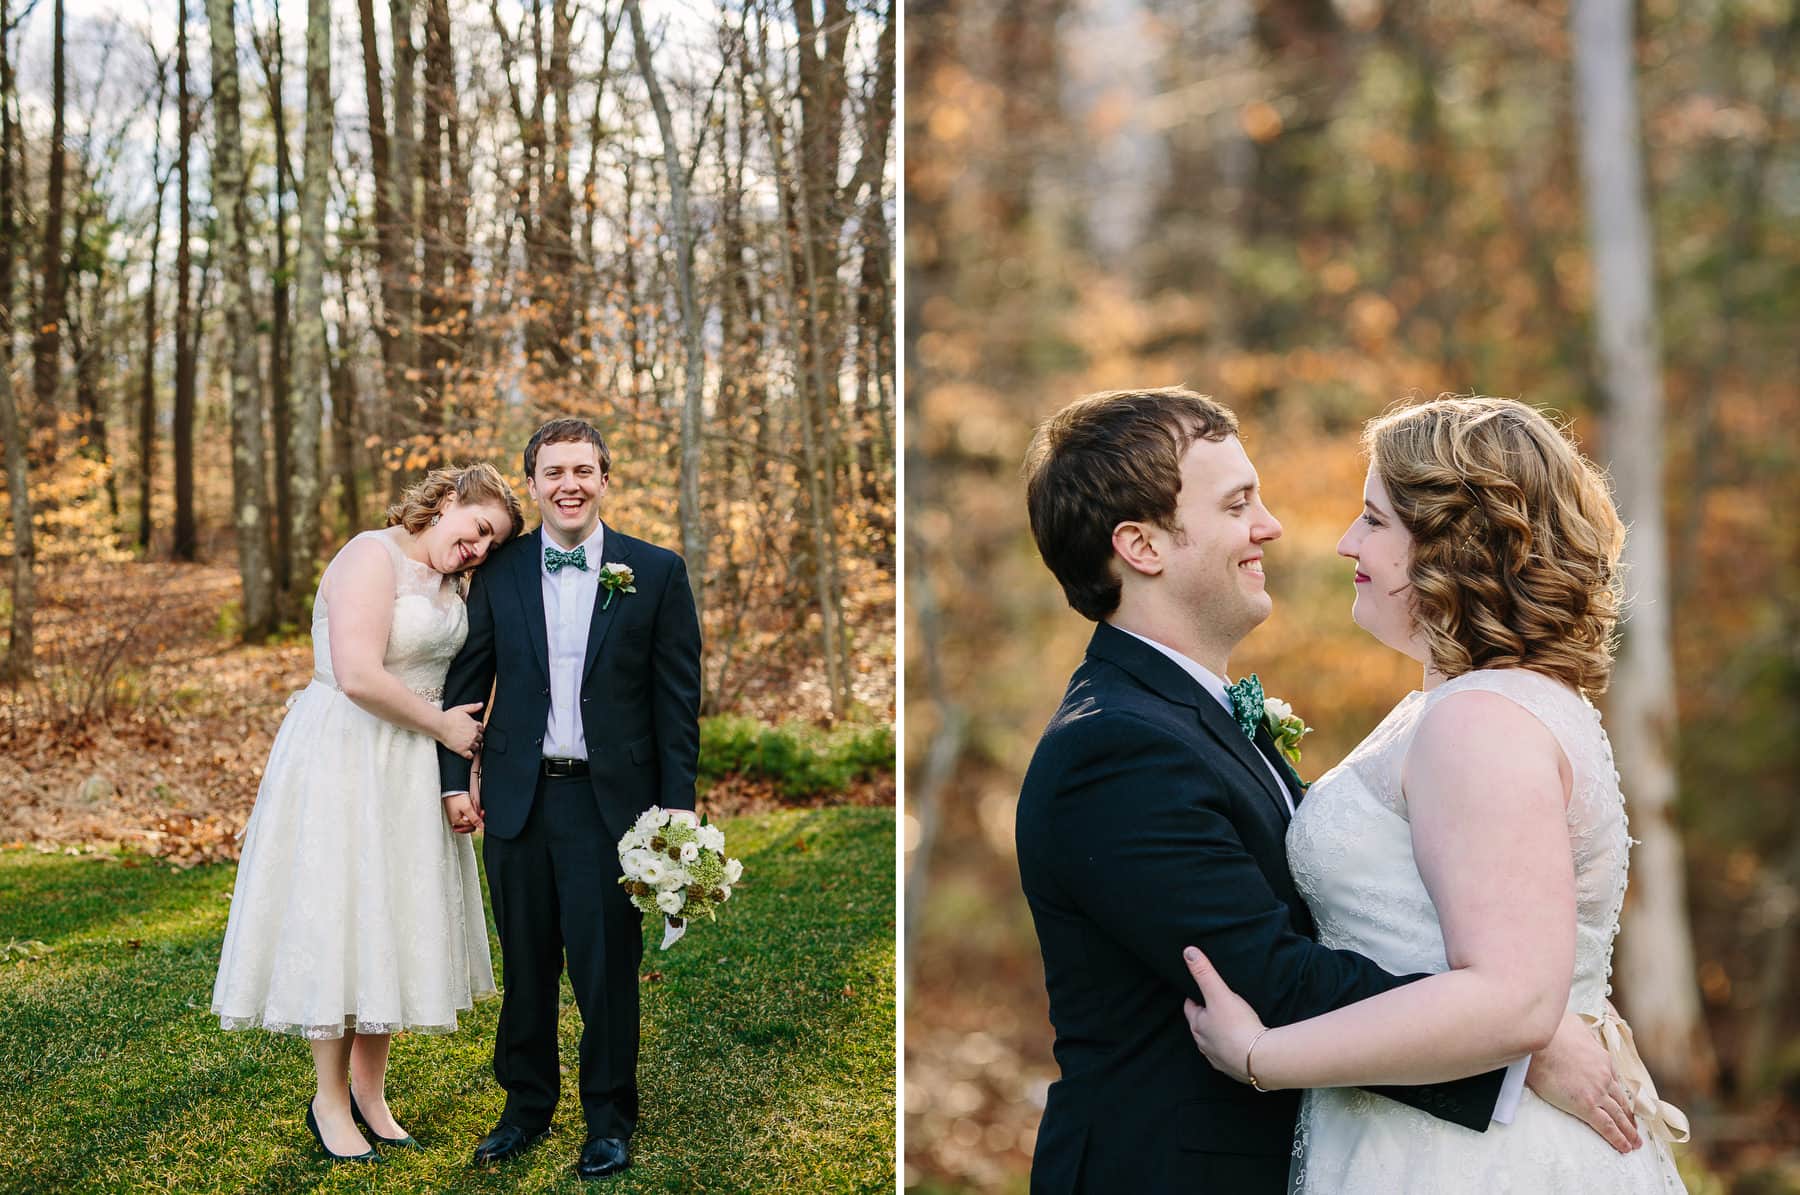 Sweet wedding portraits at the Renaissance Golf Club in Haverhill, MA.